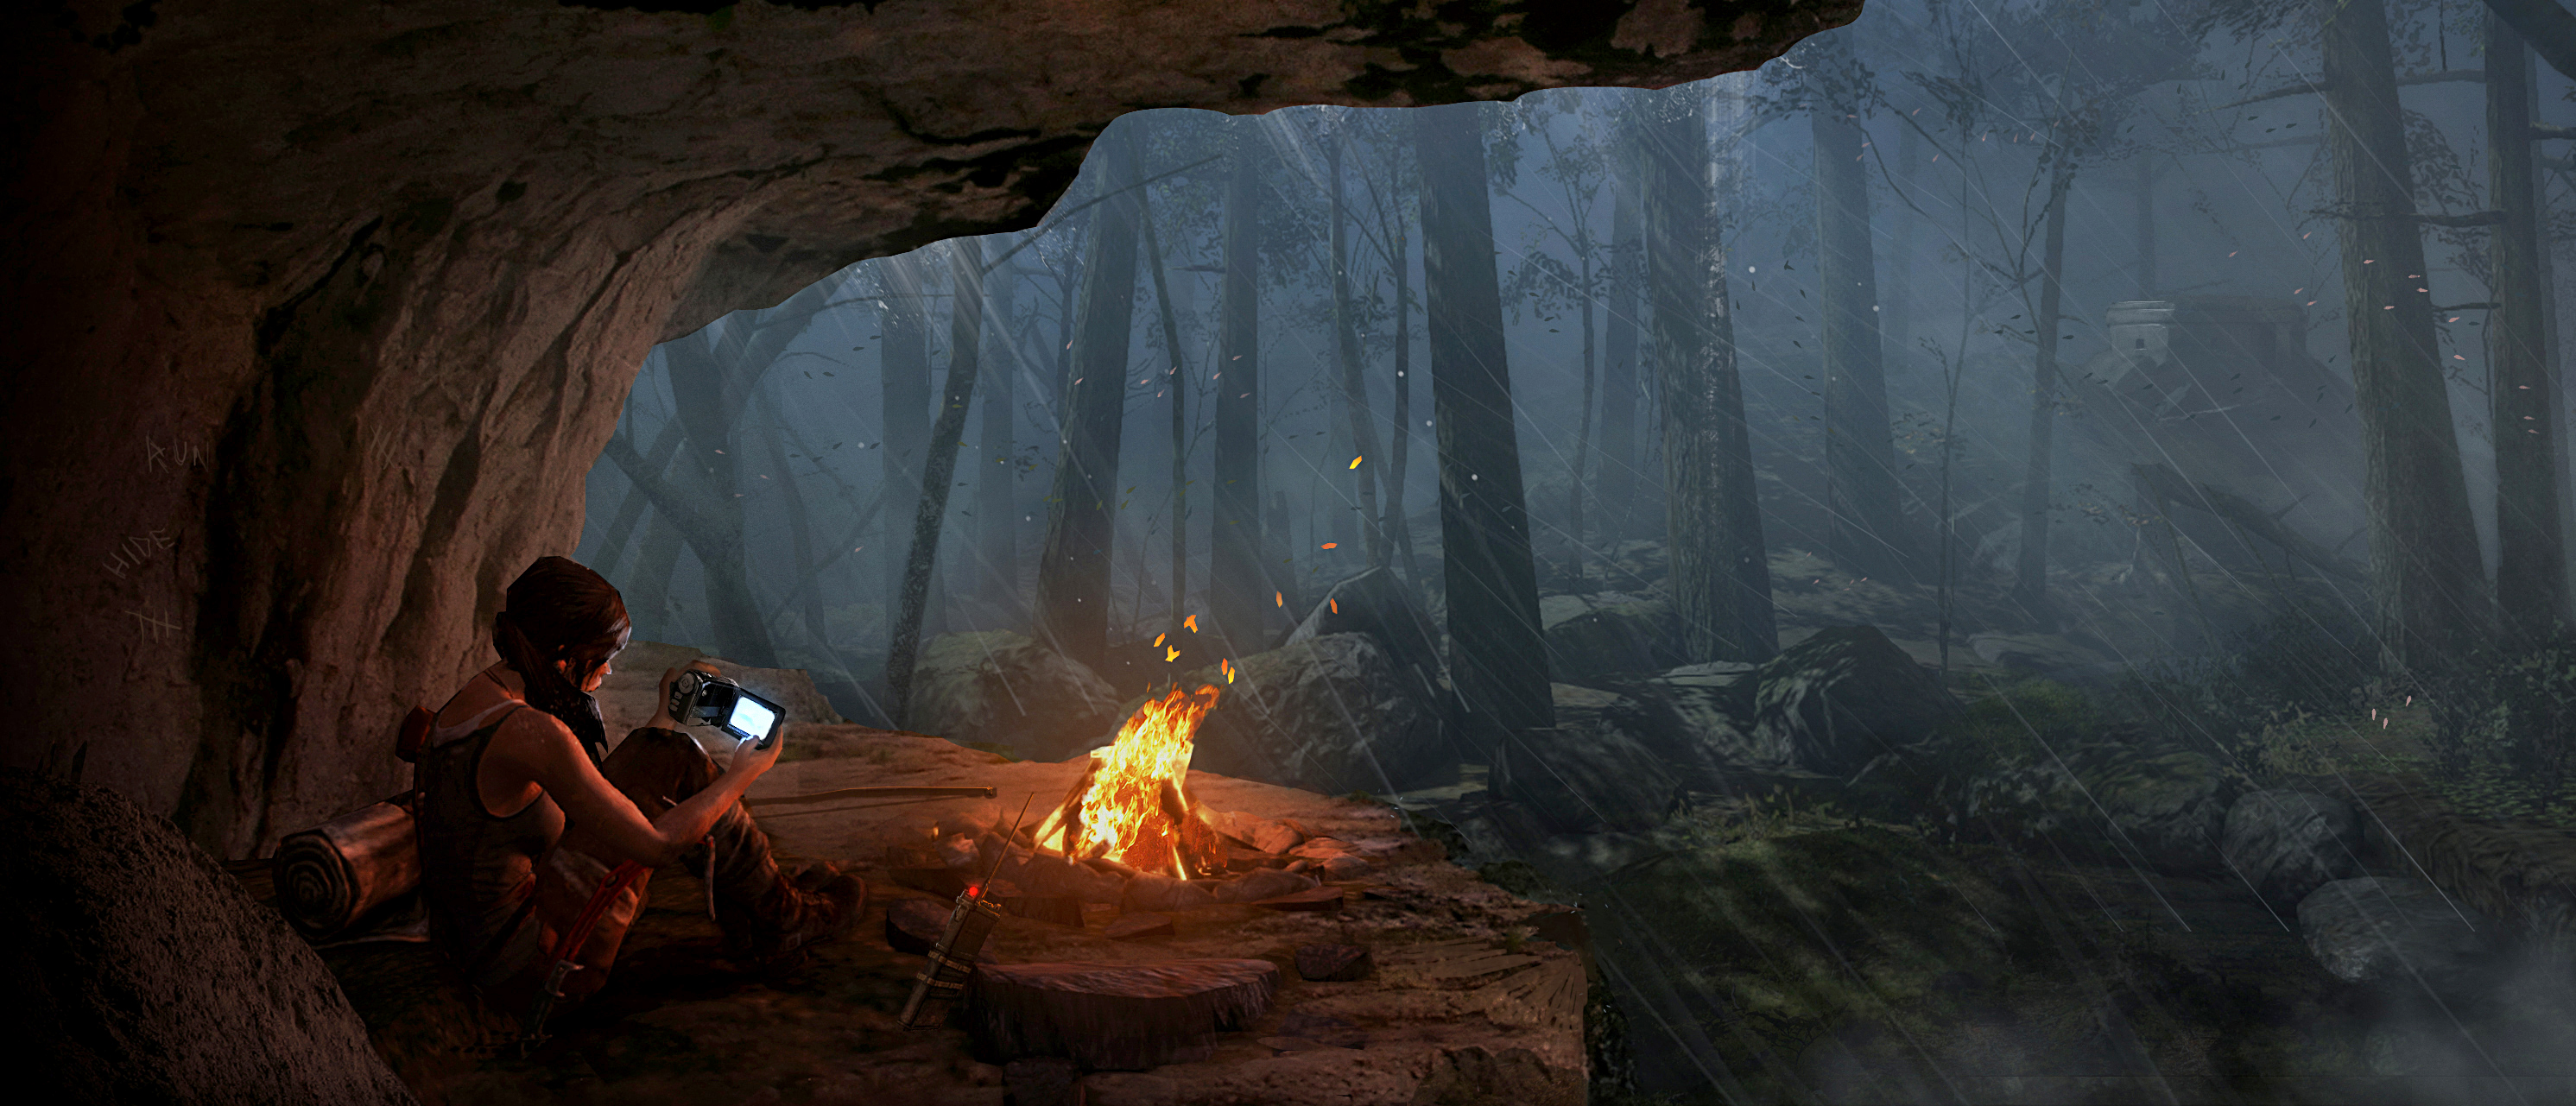 TOMB RAIDER 2013 Preview Video, Screenshots, Concept Art and Other Media